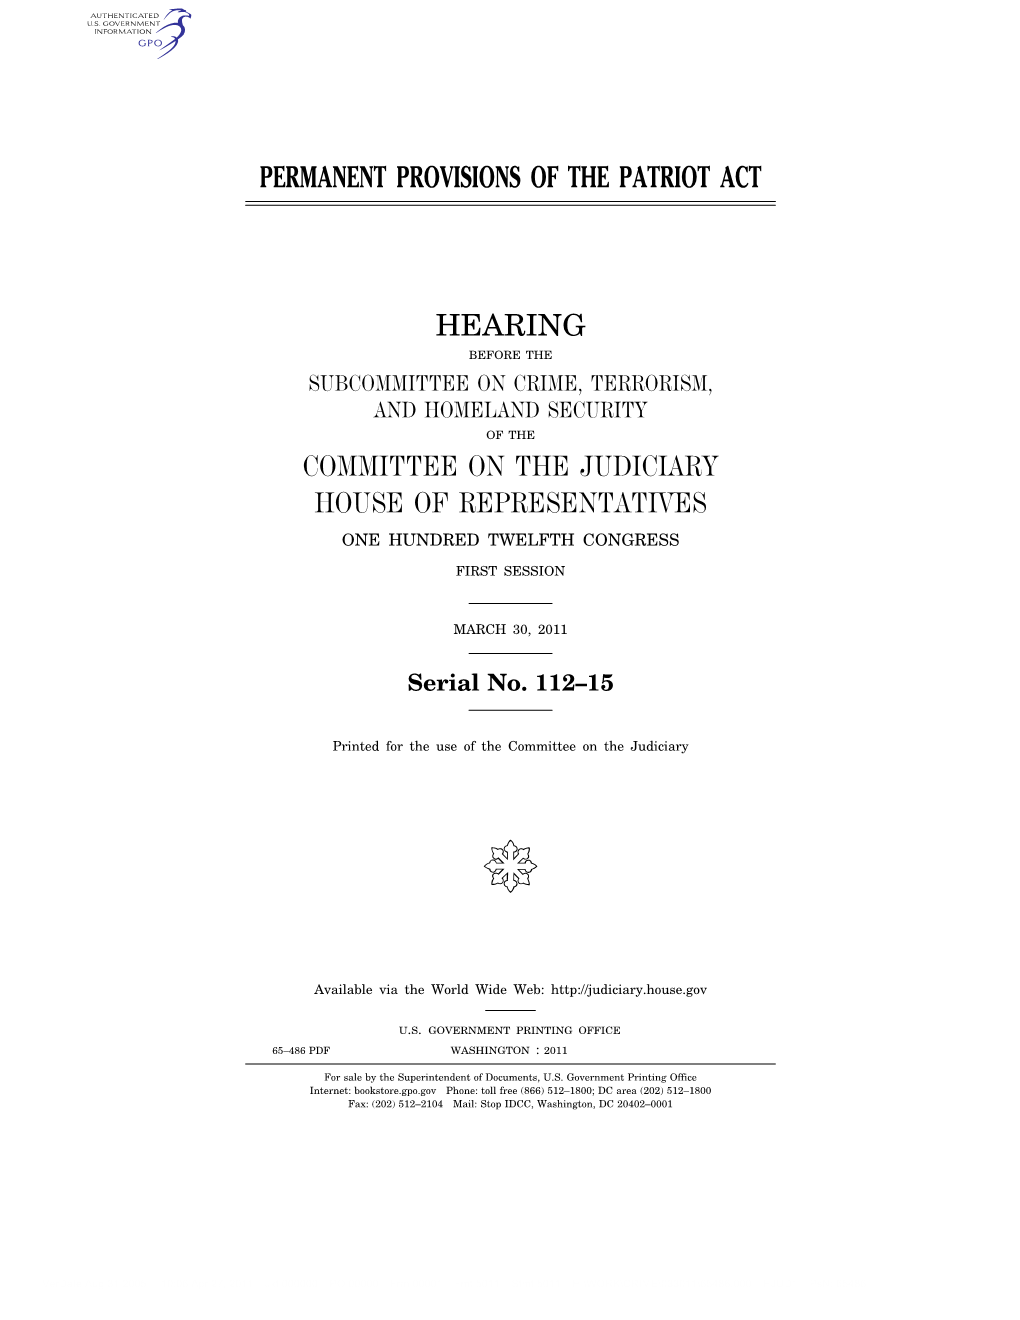 Permanent Provisions of the Patriot Act